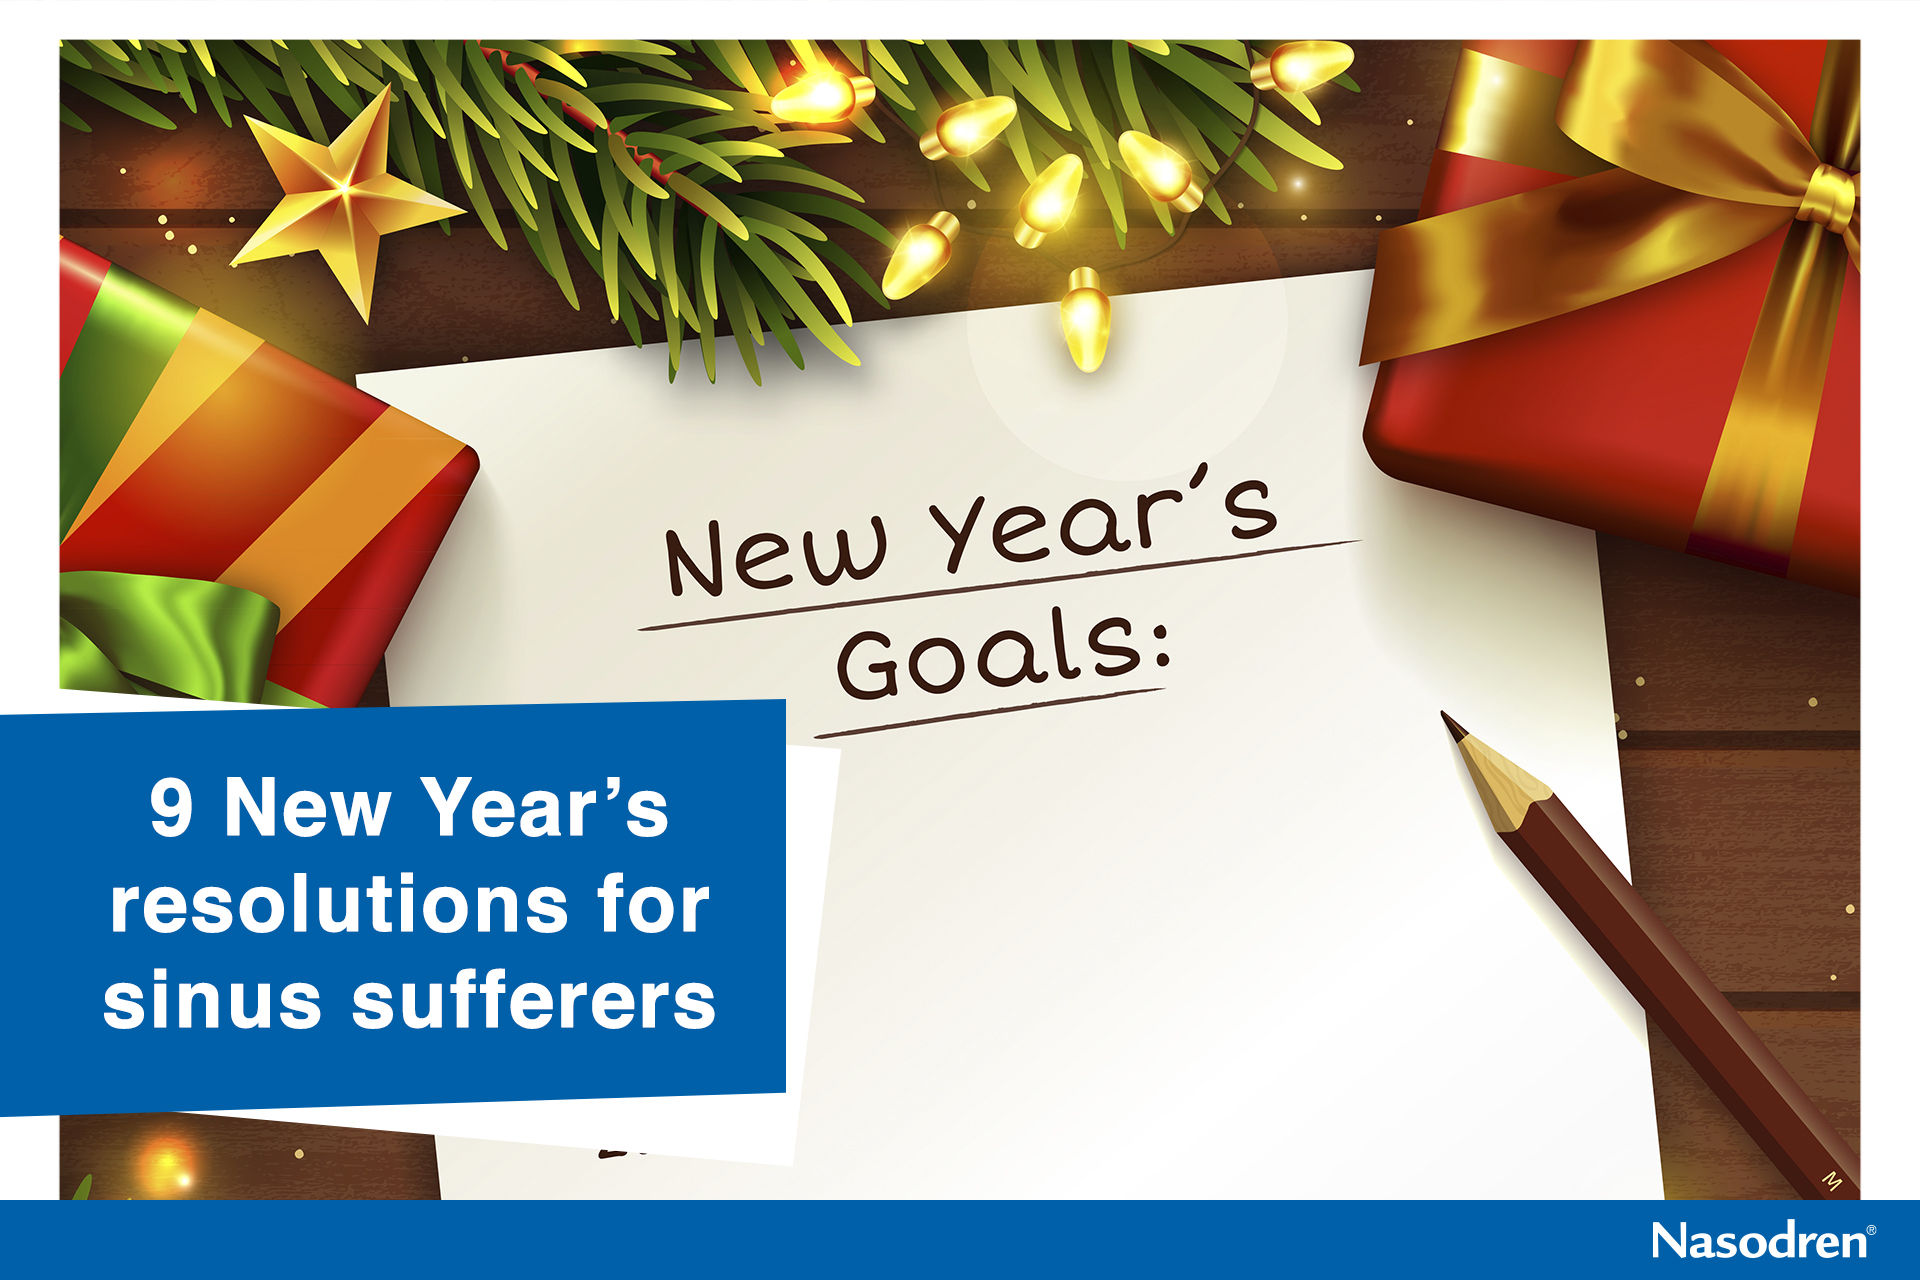 9 New Year’s resolutions for sinus sufferers